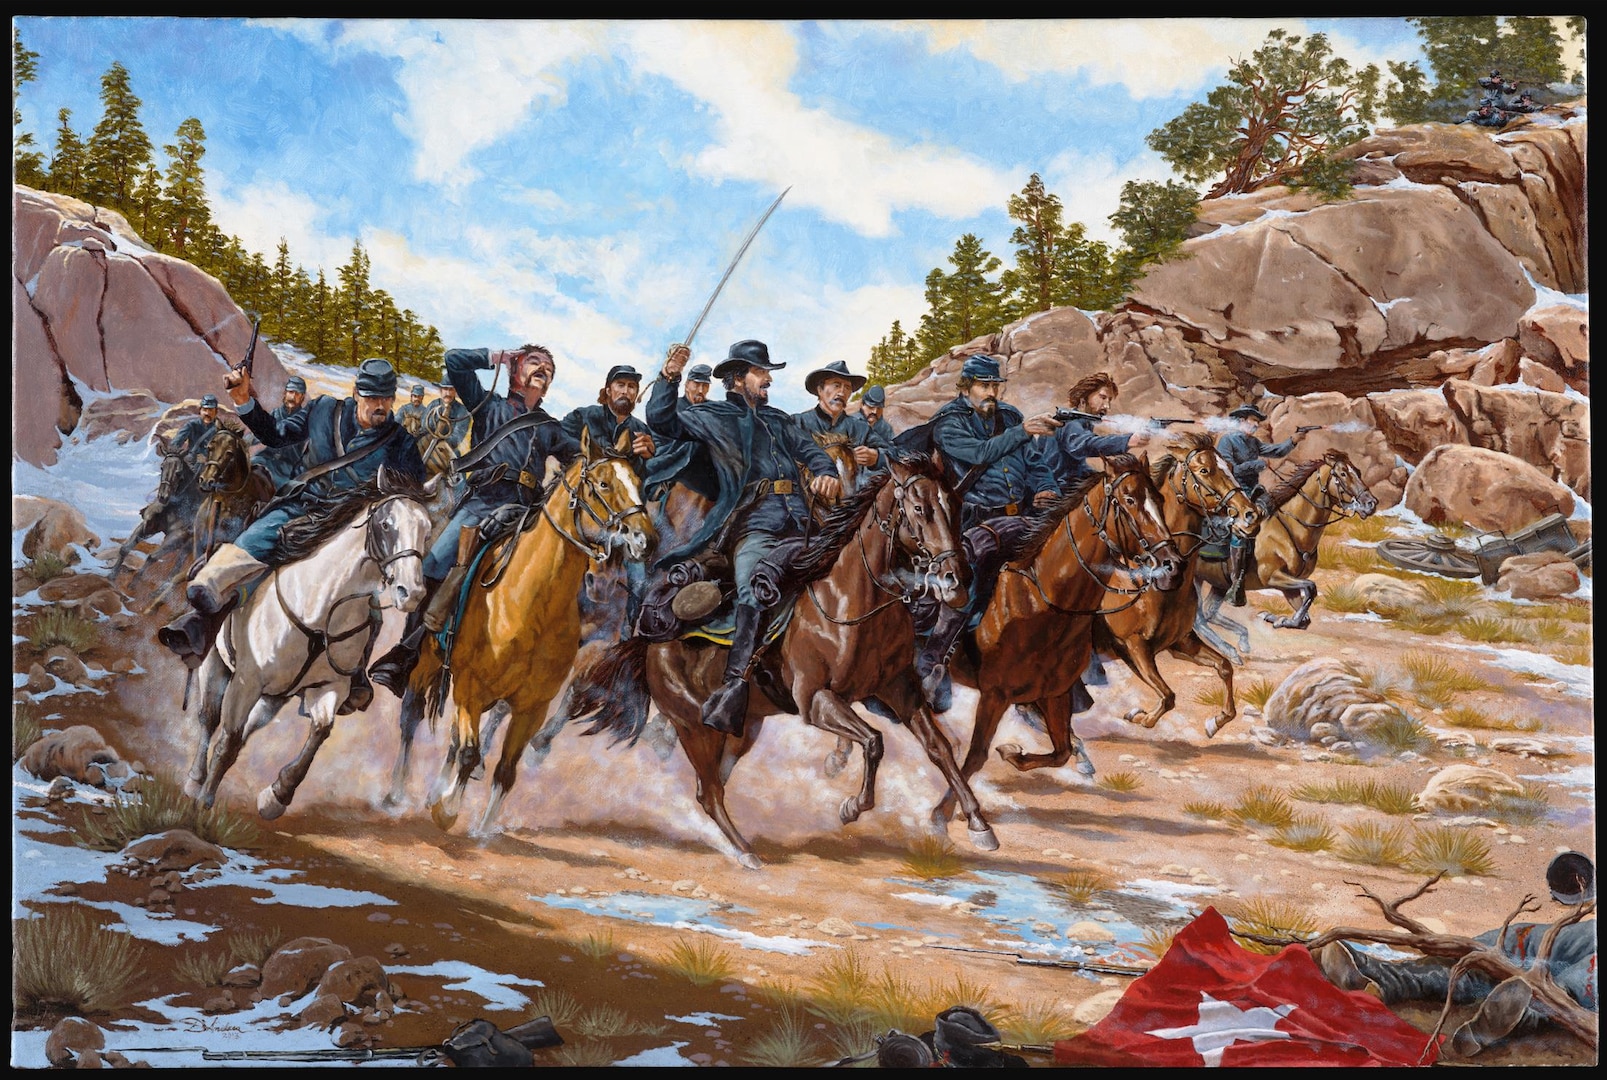 Domenick d’Andrea’s National Guard Heritage Painting, “Glorieta Pass – Action at Apache Canyon,” immortalizes the Union cavalry charge at the Battle of Glorieta Pass, known as the Gettysburg of the West, March 26, 1862.  The charge took place during the first phase of the battle and the first hostile engagement for the First Colorado Infantry Regiment.  According to military historians, U.S. Army Maj. John Chivington, Colorado National Guard, ordered the action up the narrow canyon when Texas Confederates began to withdraw their artillery.  After three days of fighting along the Santa Fe Trail in New Mexico, Confederates retreated to Texas, ending their hopes of western conquest. 